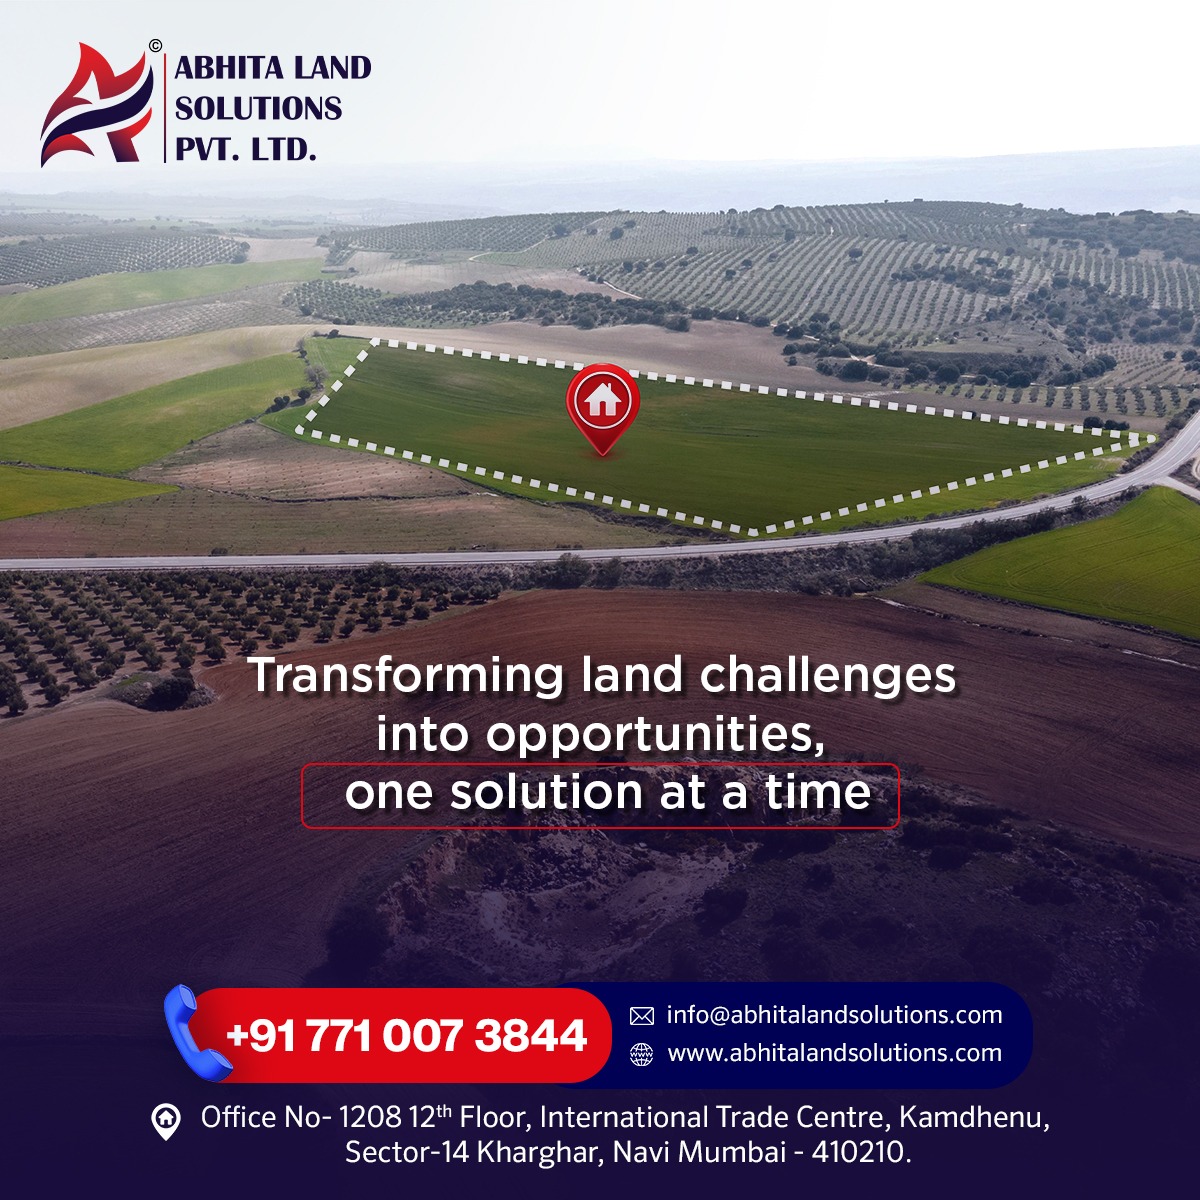 Transforming land challenges into opportunities, one solution at a time.
#LandDisputes #LegalGuardians #LandProtection  #LandMatters #LandRights #LegalAdvice #LegalServices #LegalSolutions #LegalAdvocate #landsolution #landservice #LegalExperts #abhitalandsolutions #navimumbai